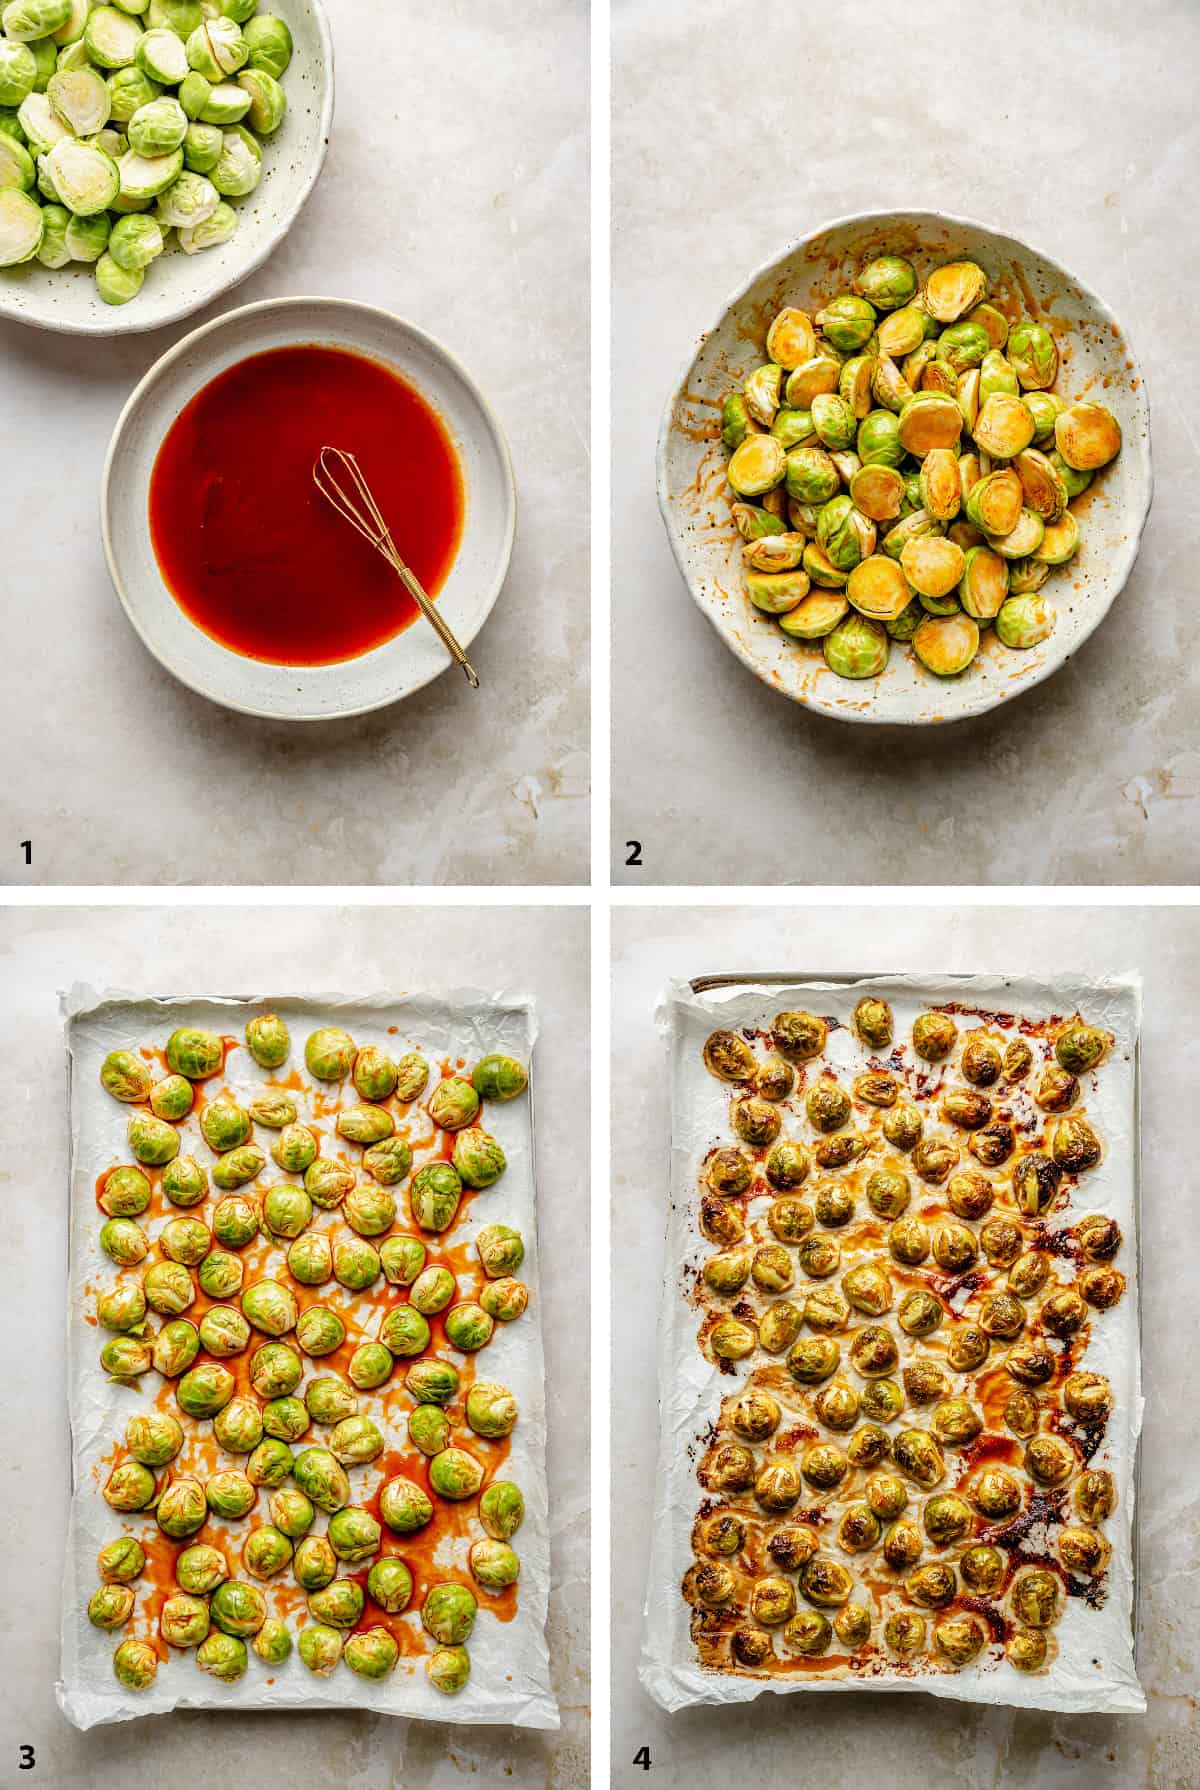 Process of making glazed, coating sprouts, prebaked and post baked sprouts on baking sheet.